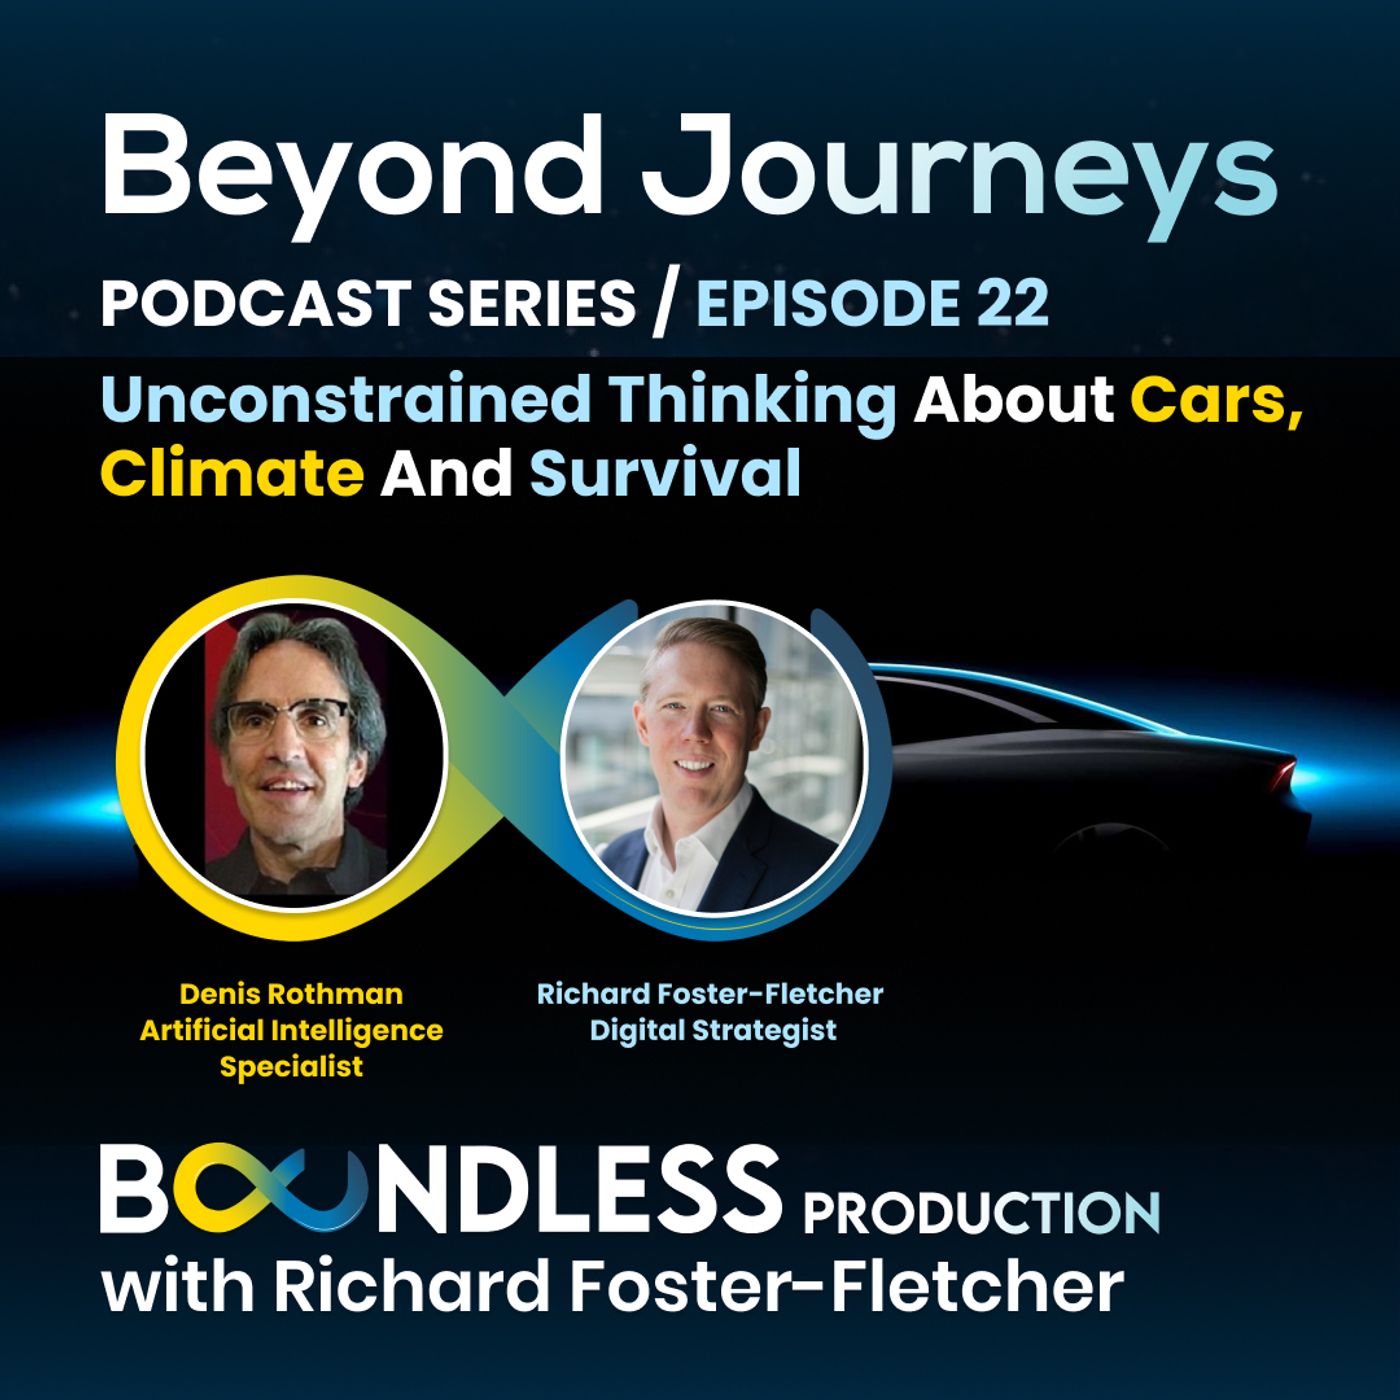 EP22 Beyond Journeys: Denis Rothman, Artificial Intelligence Specialist: Unconstrained Thinking about Cars, Climate and Survival